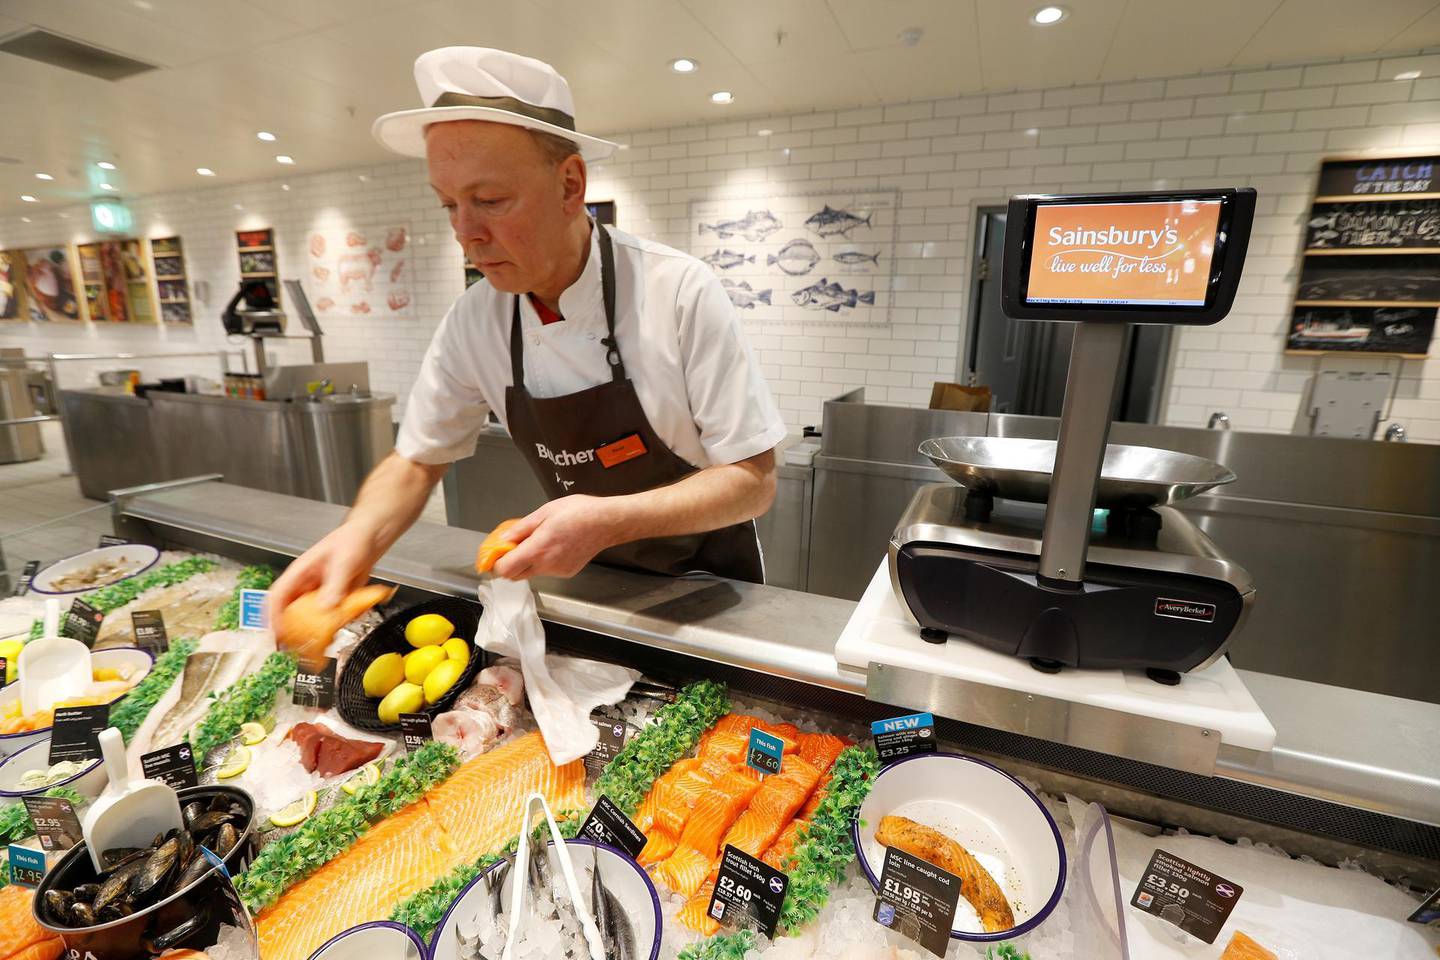 FILE PHOTO: A Sainsbury's worker fills a fish counter in a store in Redhill, Britain, March 27, 2018. REUTERS/Peter Nicholls/File Photo